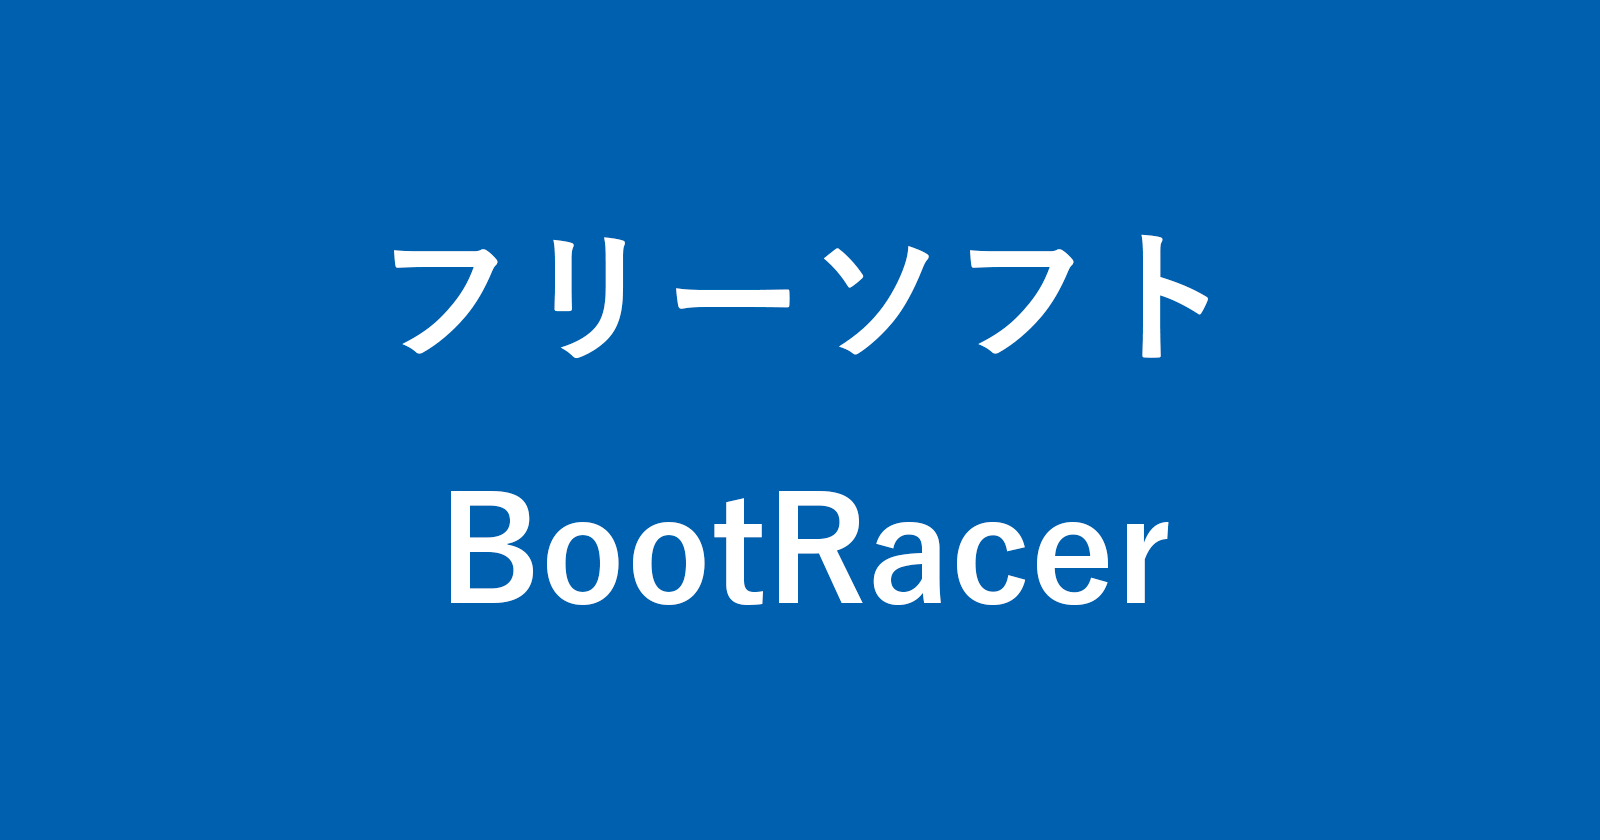 bootracer for windows